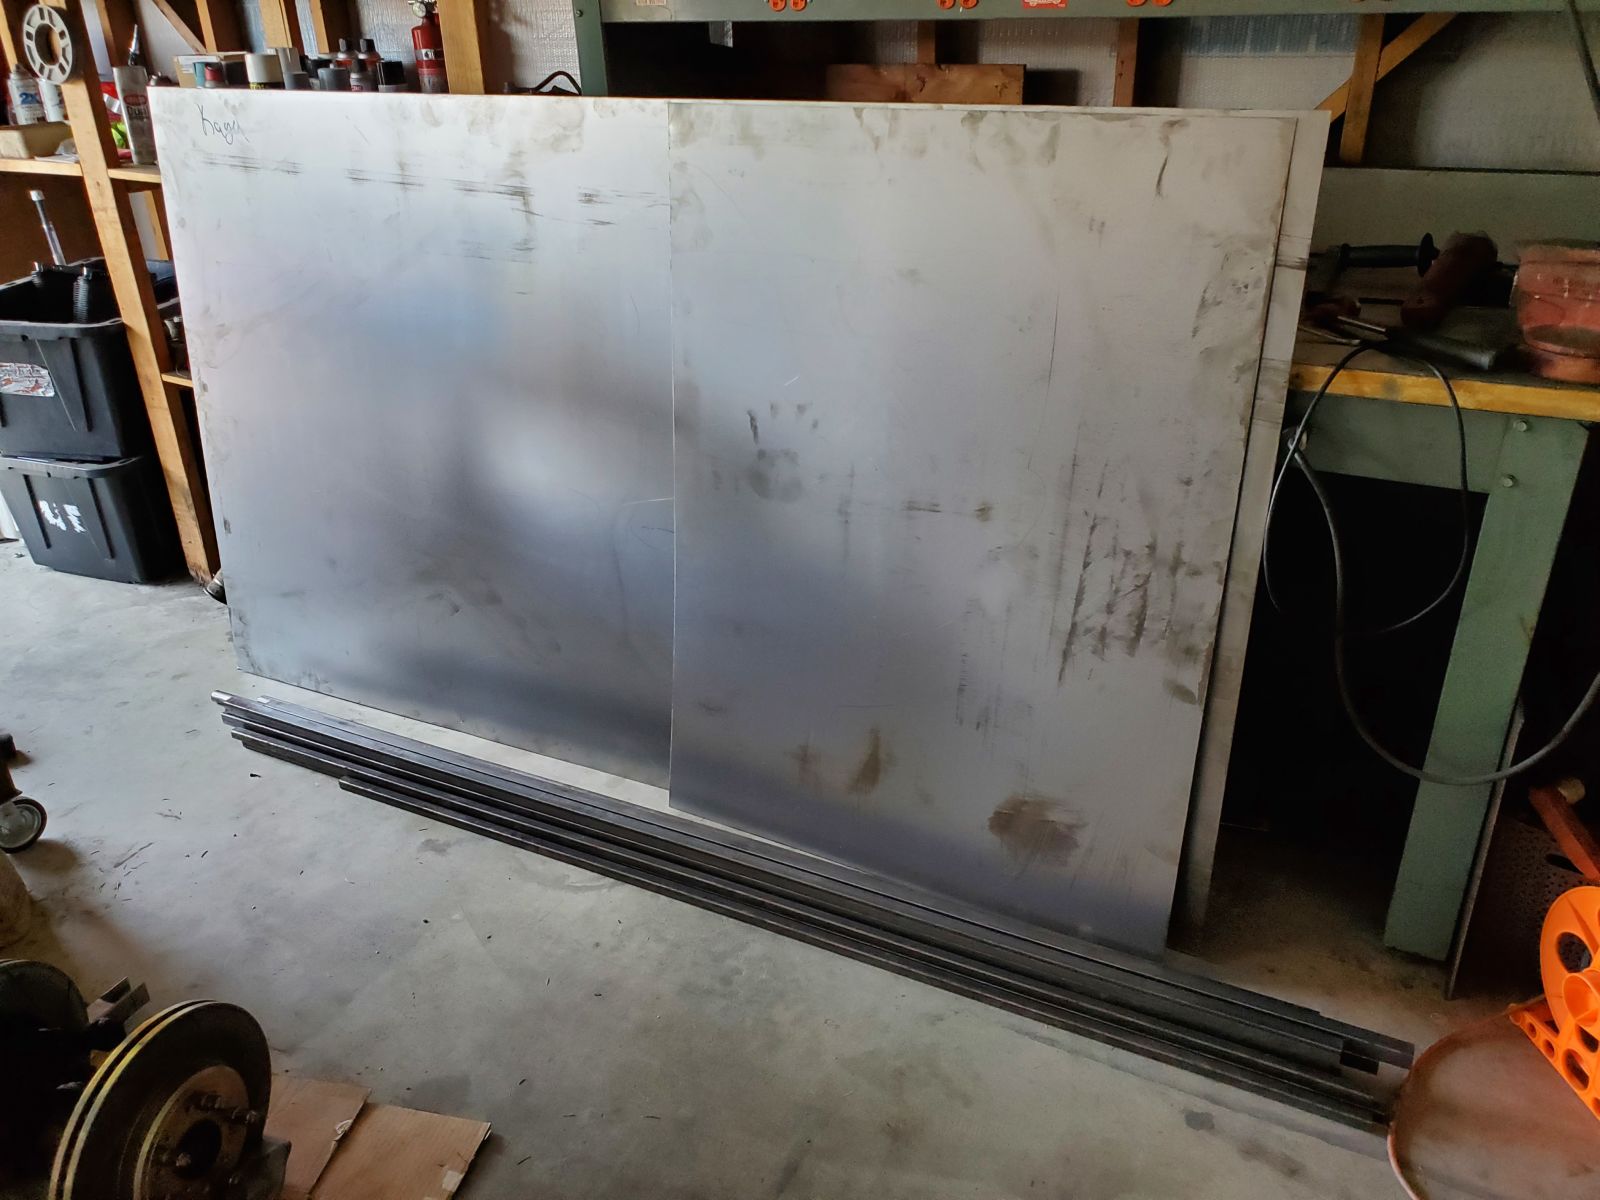 Apparently steel sheet cost a small fortune, this was over $300